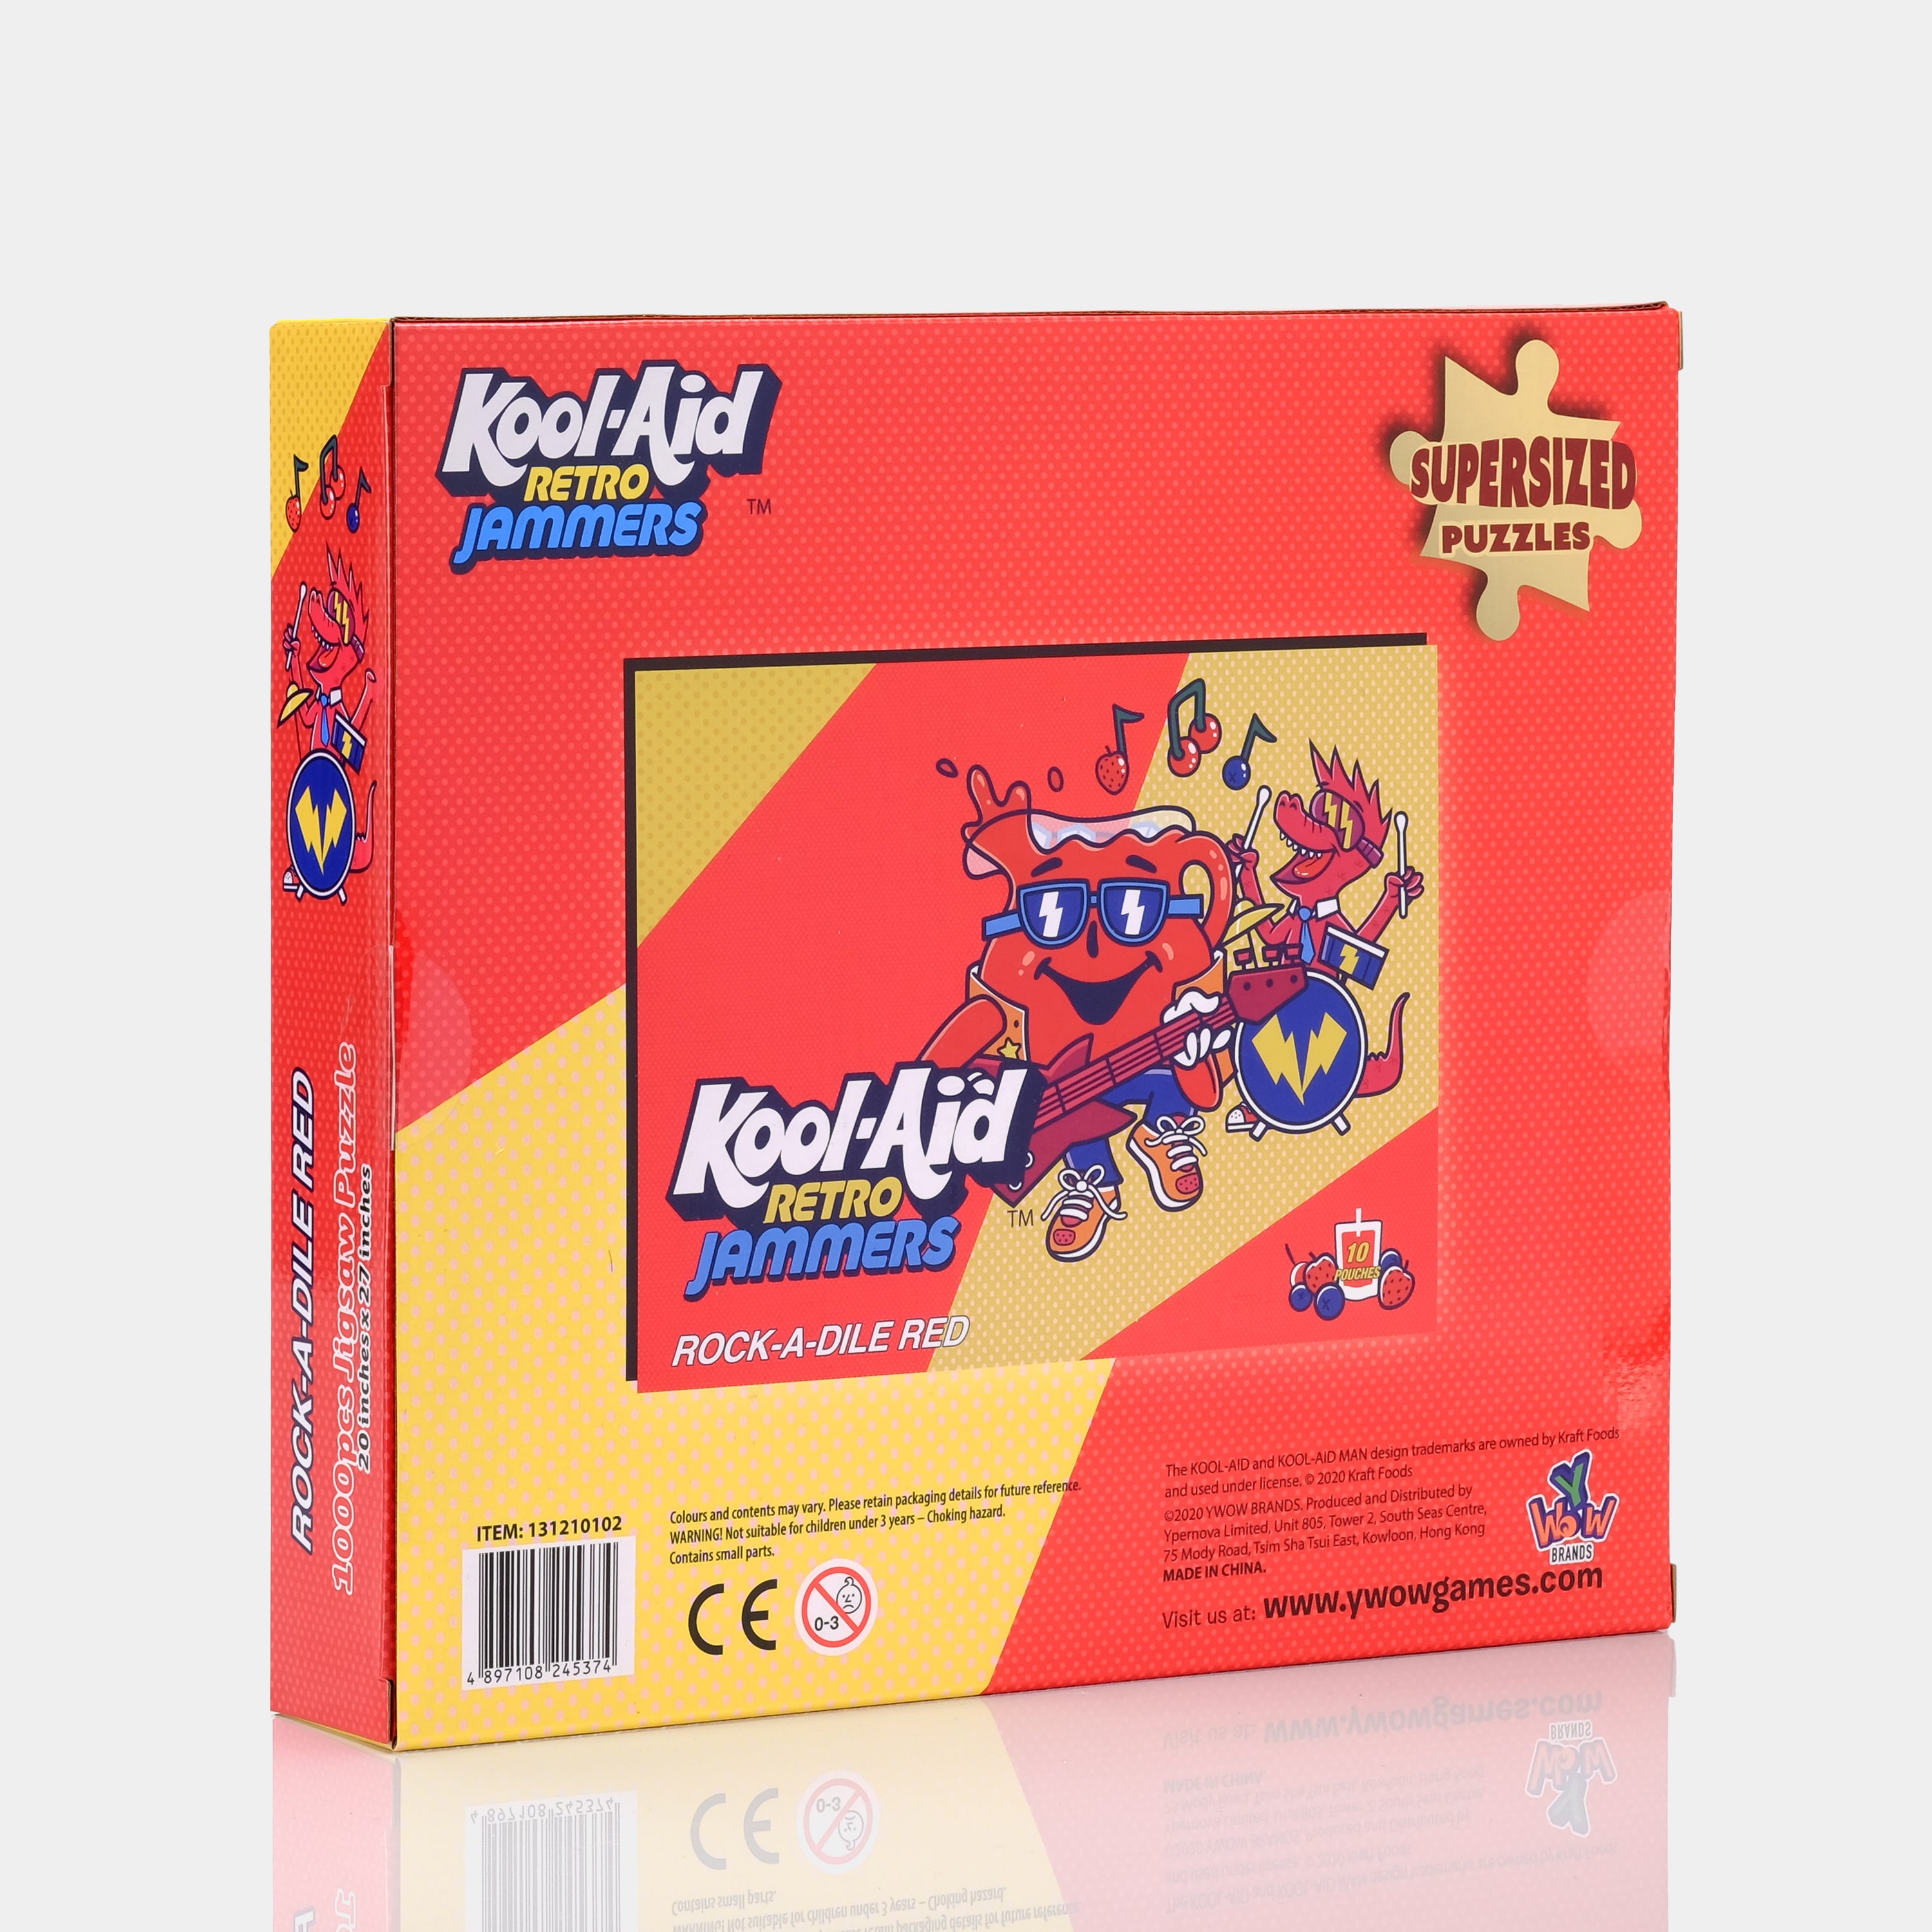 Kool-Aid Retro Jammers Rock-A-Dile Red 1000 Piece Puzzle